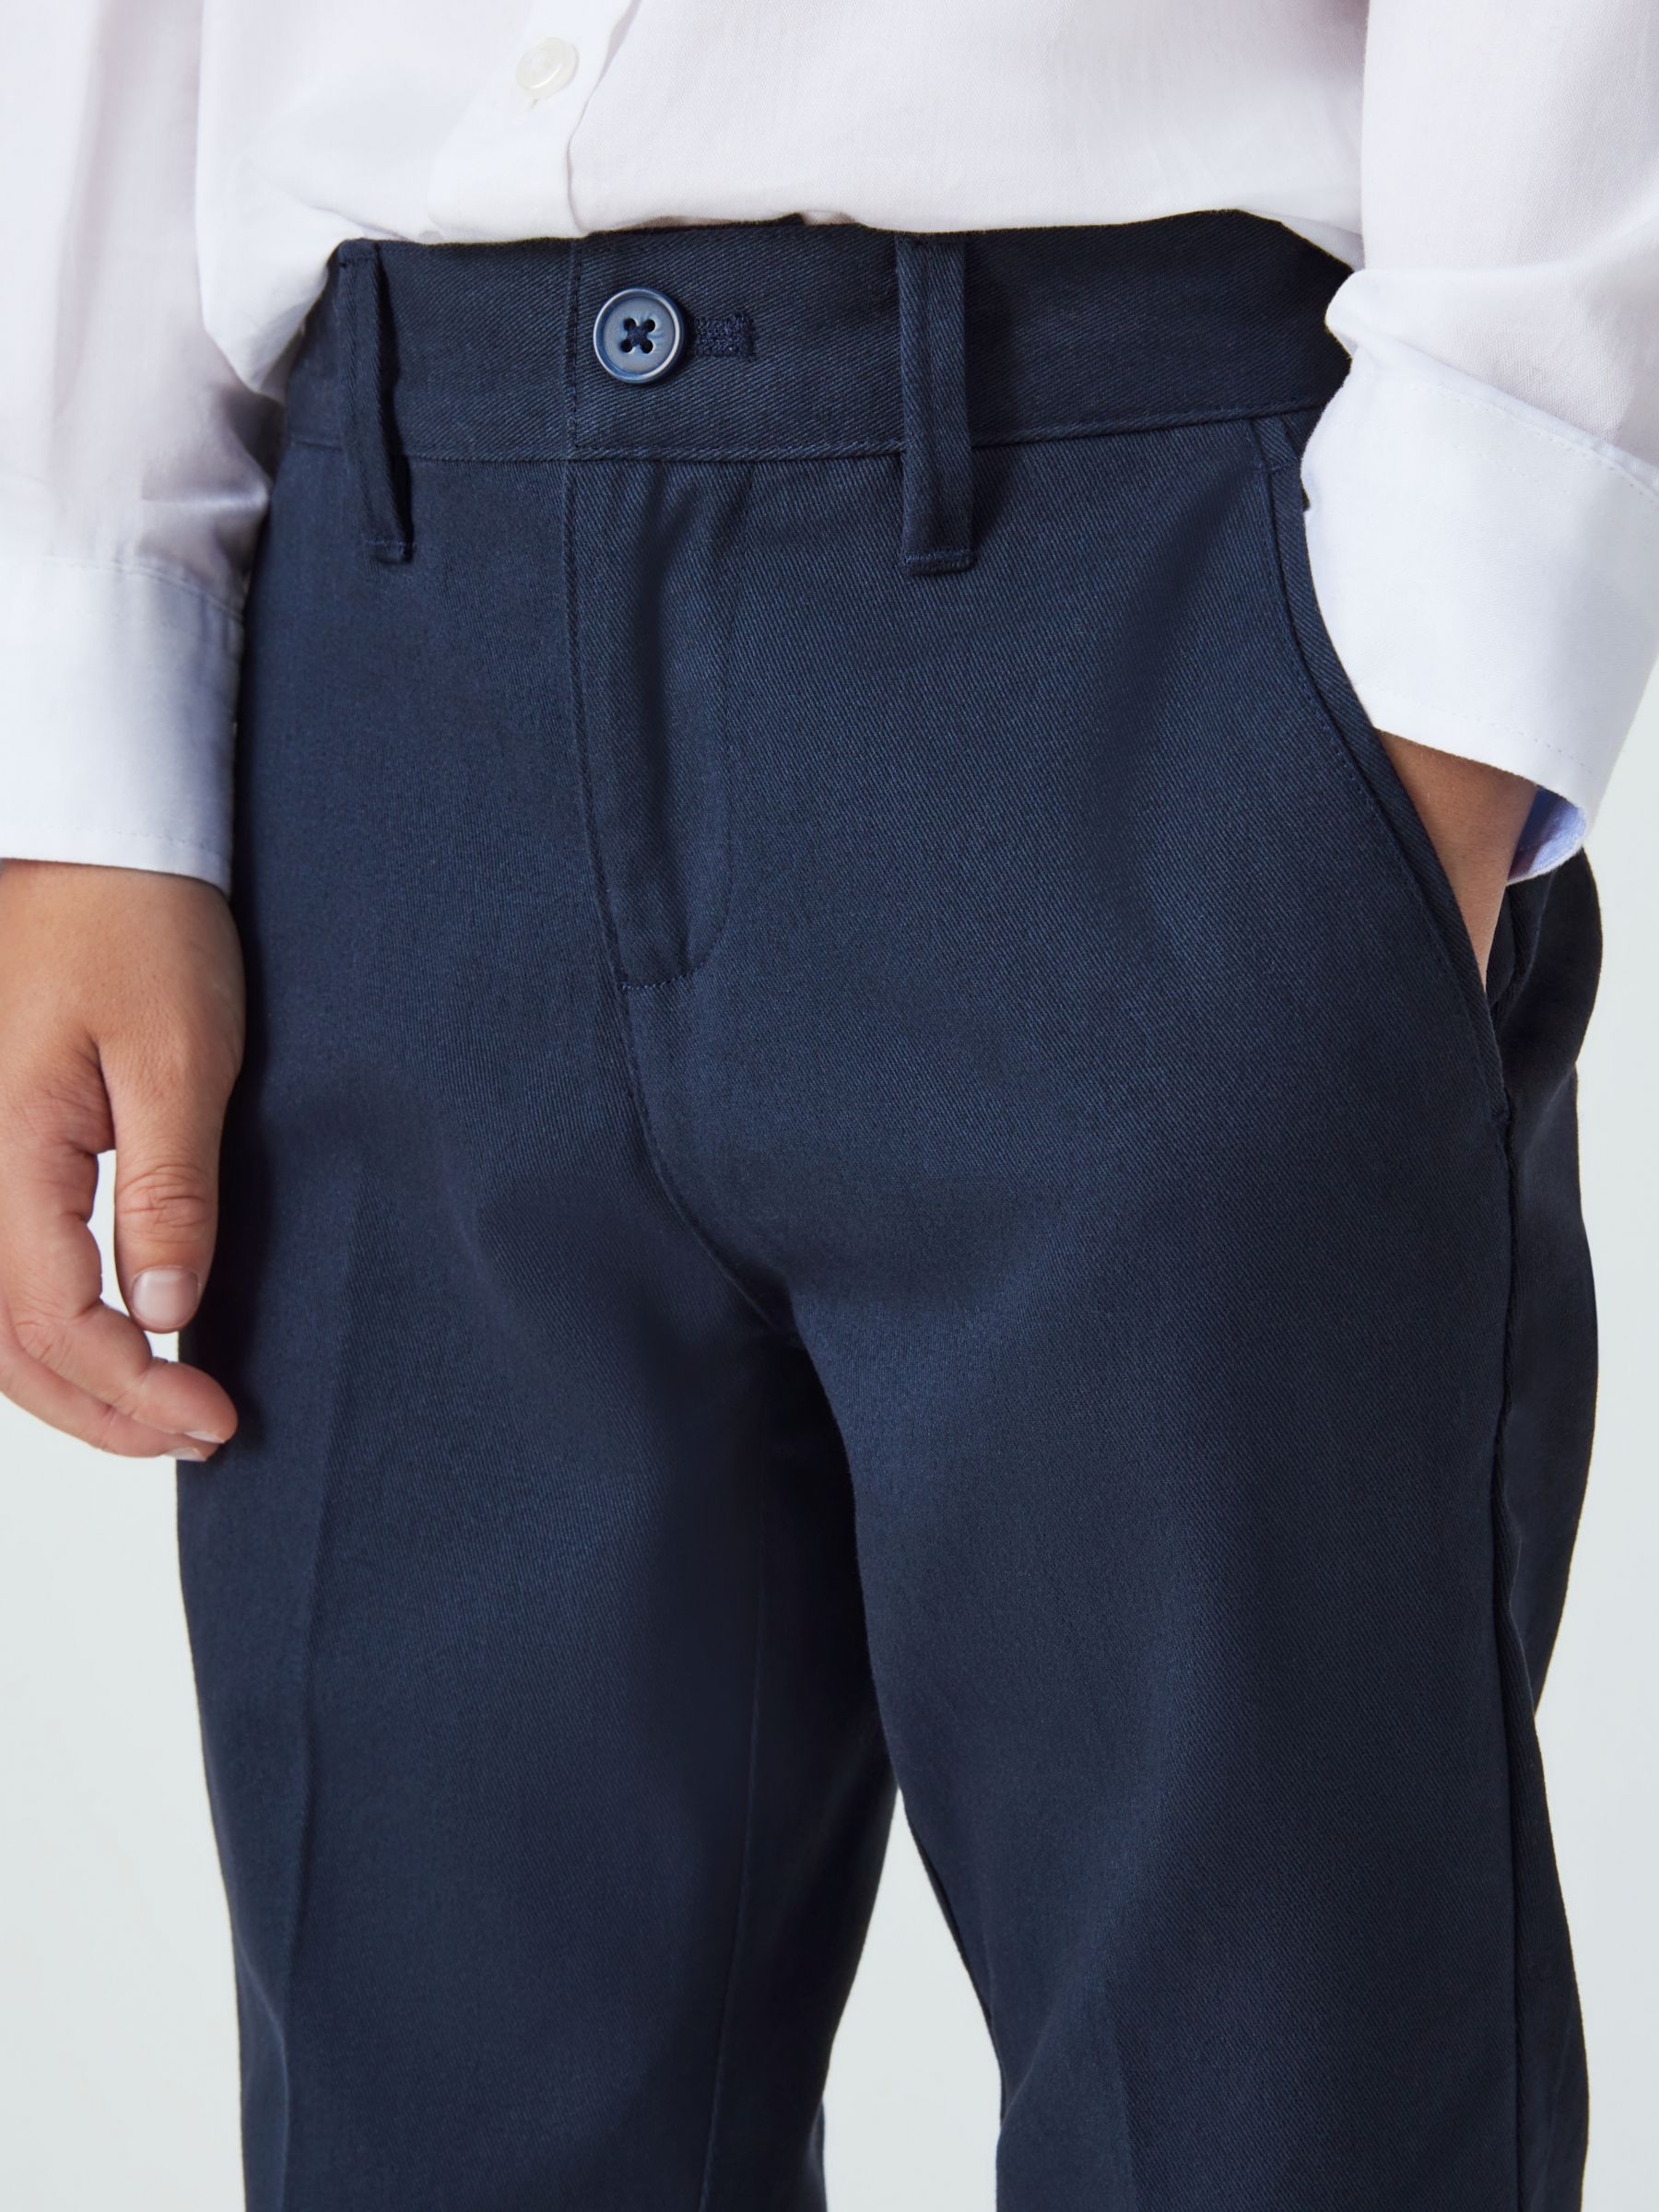 John Lewis Heirloom Collection Kids' Chino Trousers, Navy, 2 years